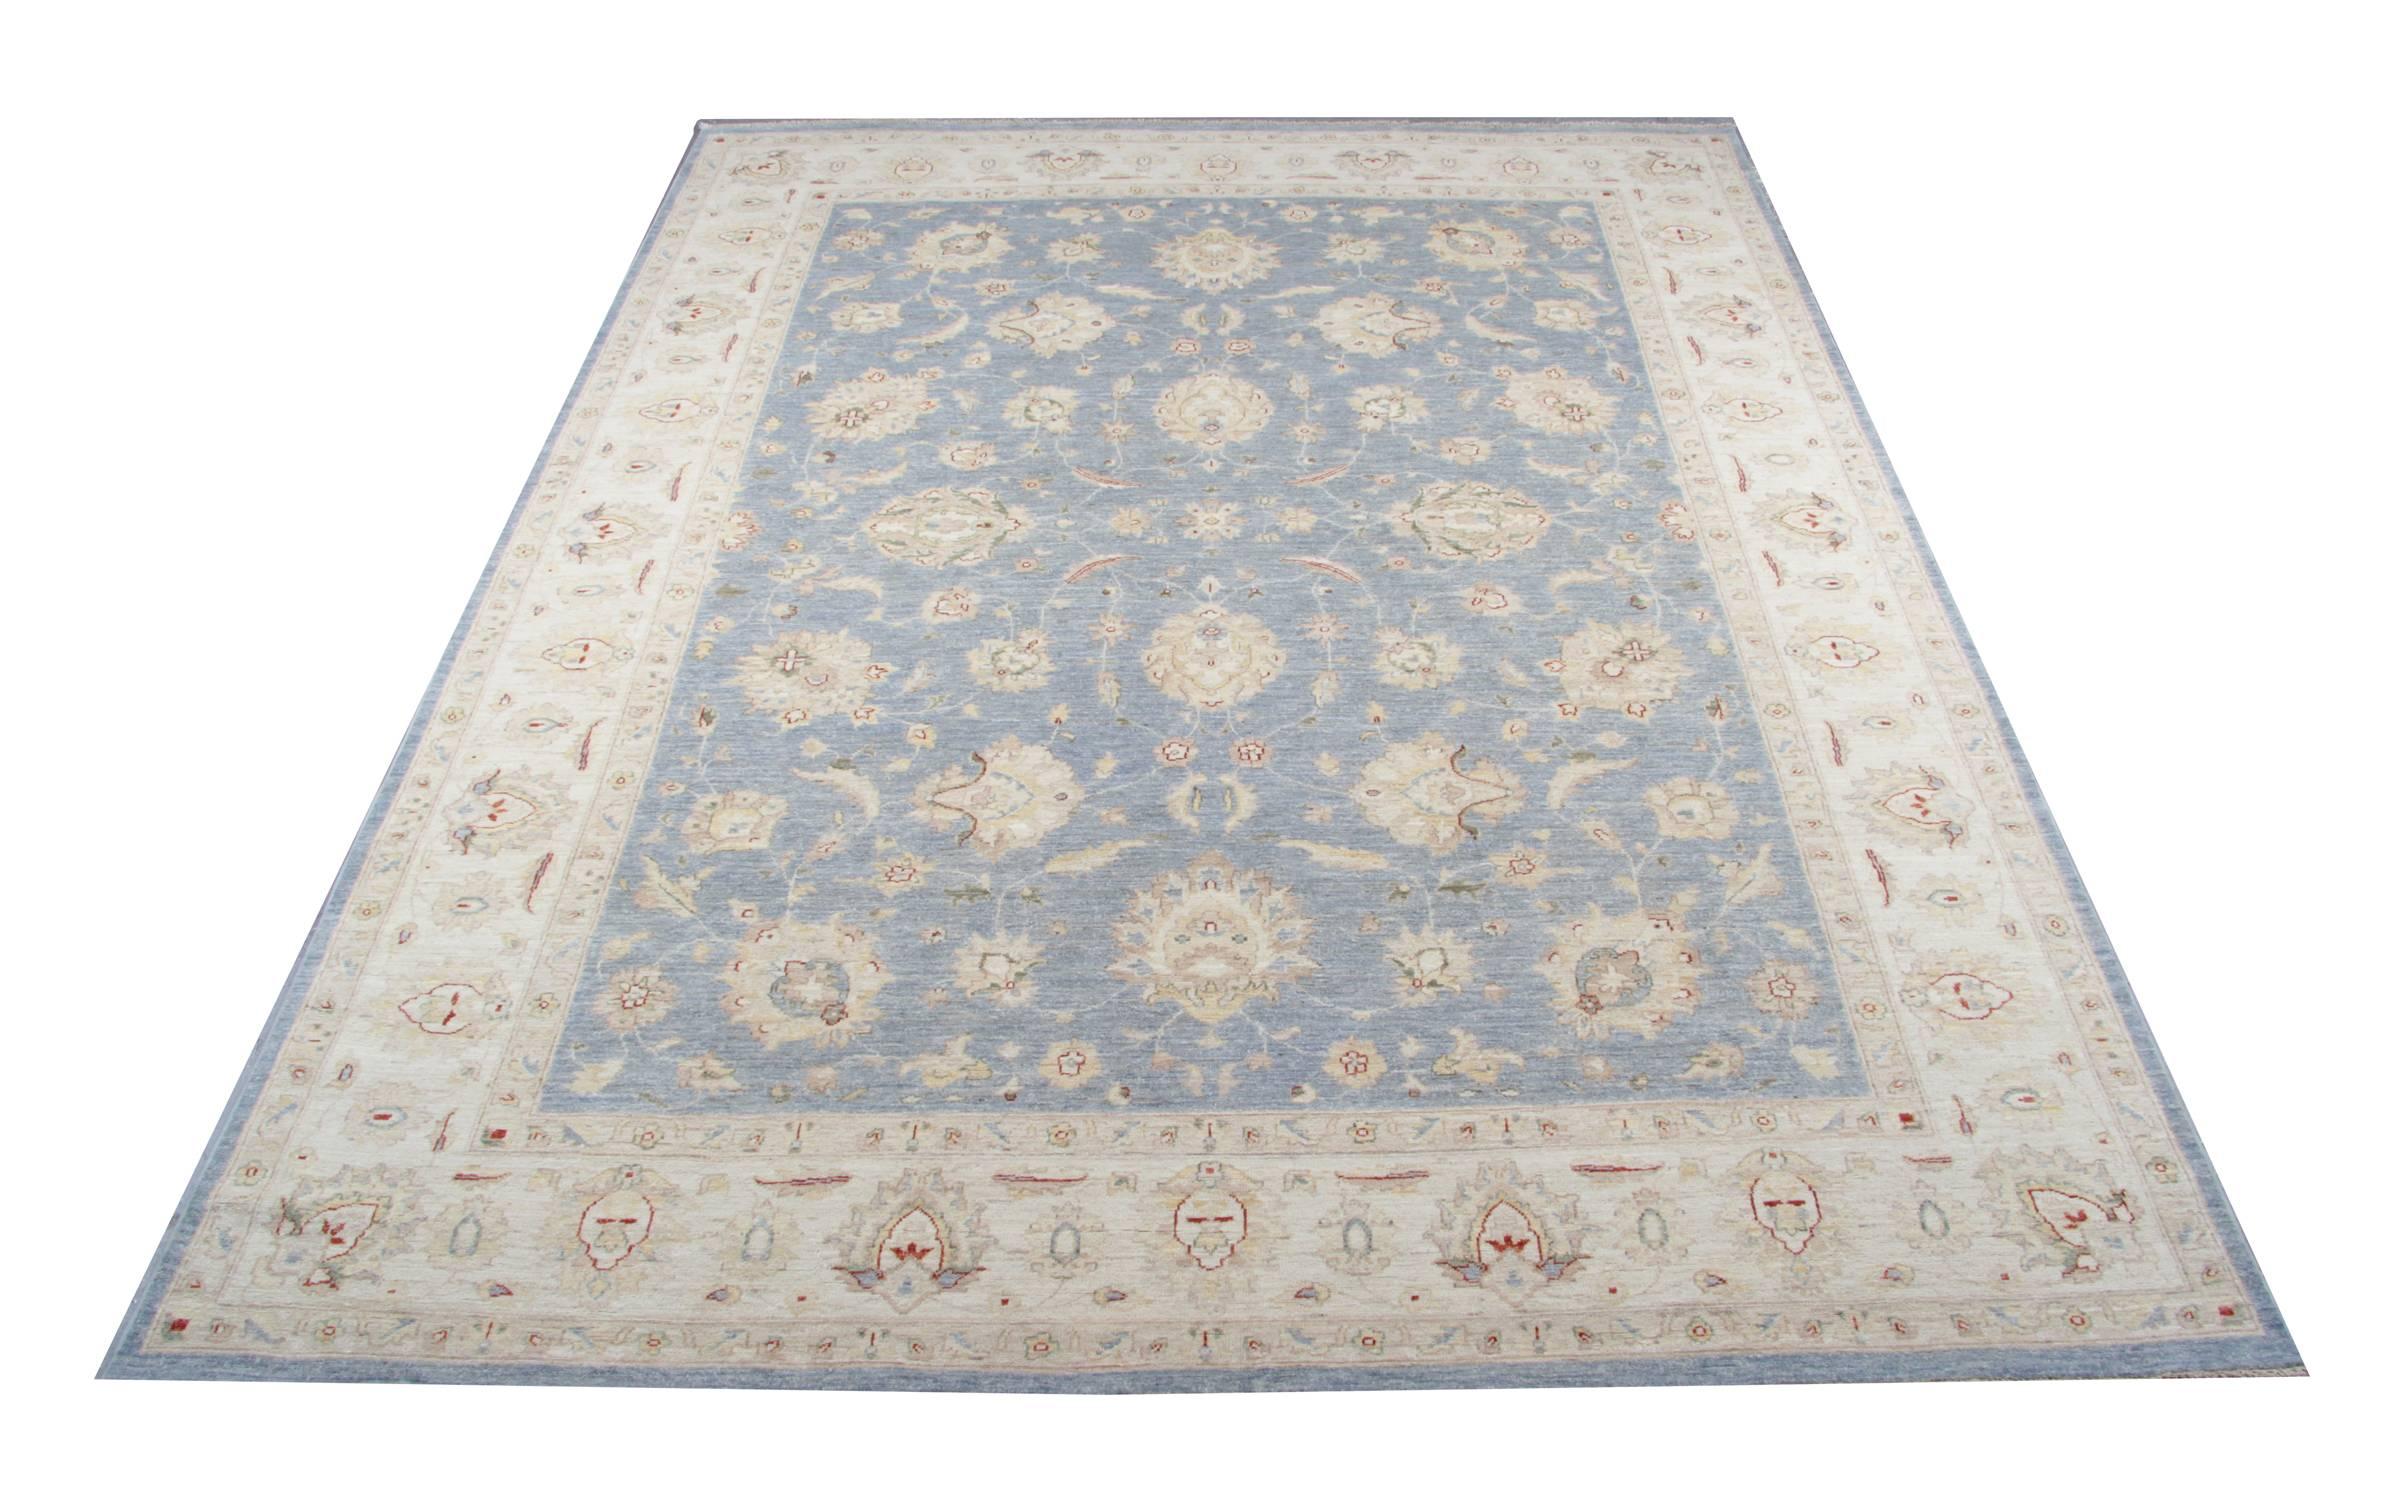 This is Ziegler Sultanabad style carpet made on our own looms by our master weavers in Afghanistan. This Afghan rug is made with all natural vegetable dyes and all hand spun wool. The large rugs design makes this floral rug a unique and one of a